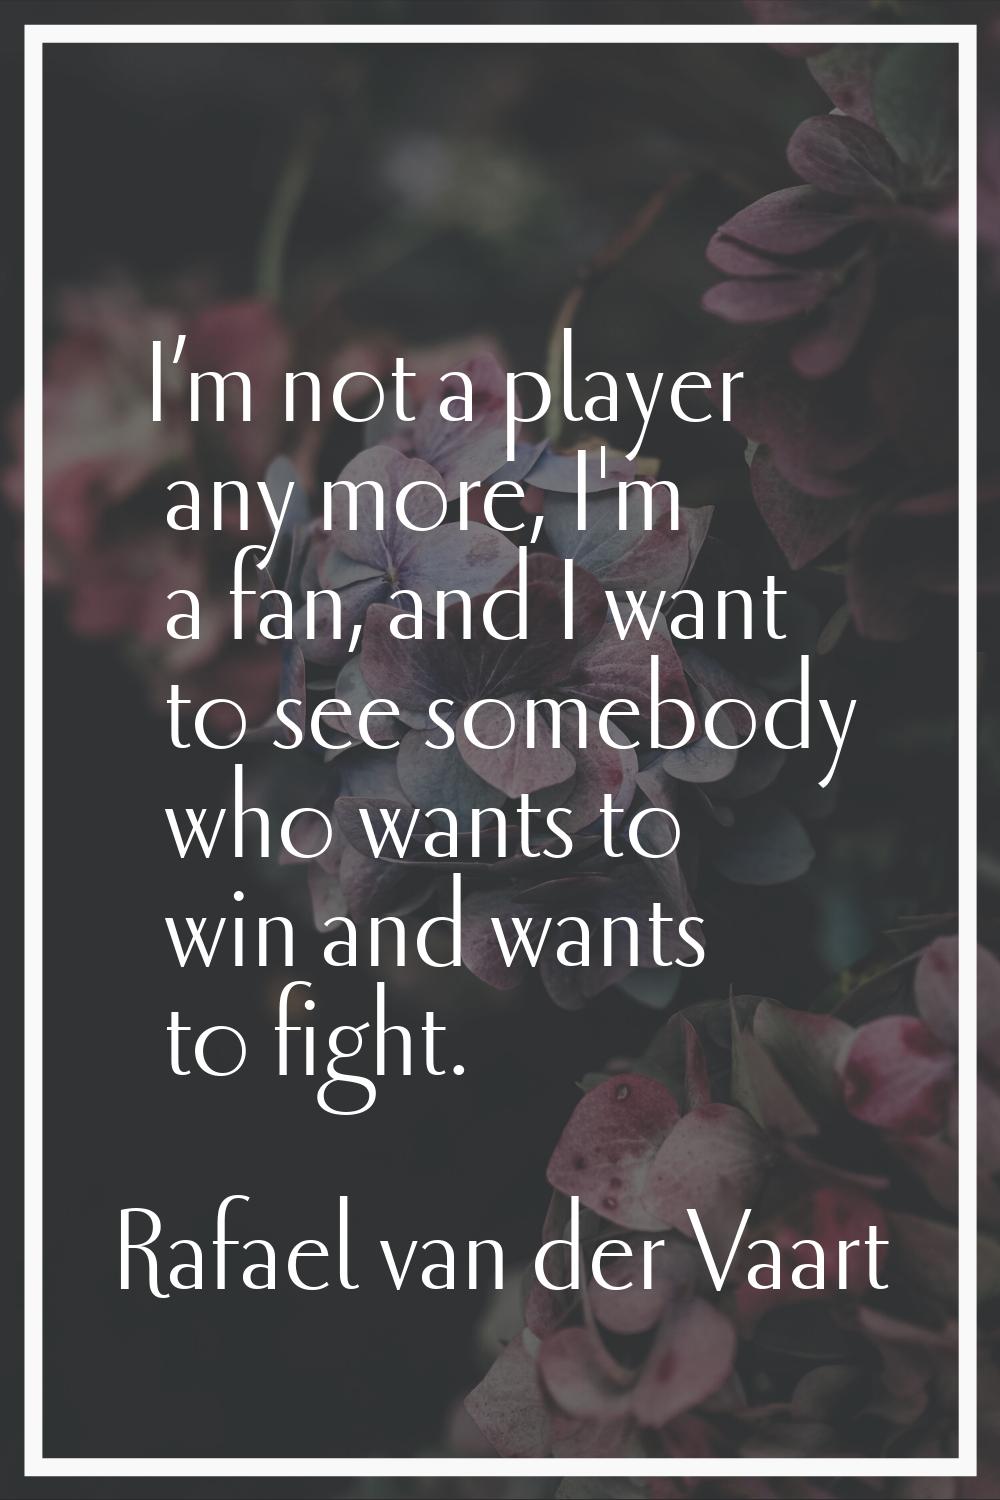 I’m not a player any more, I'm a fan, and I want to see somebody who wants to win and wants to figh